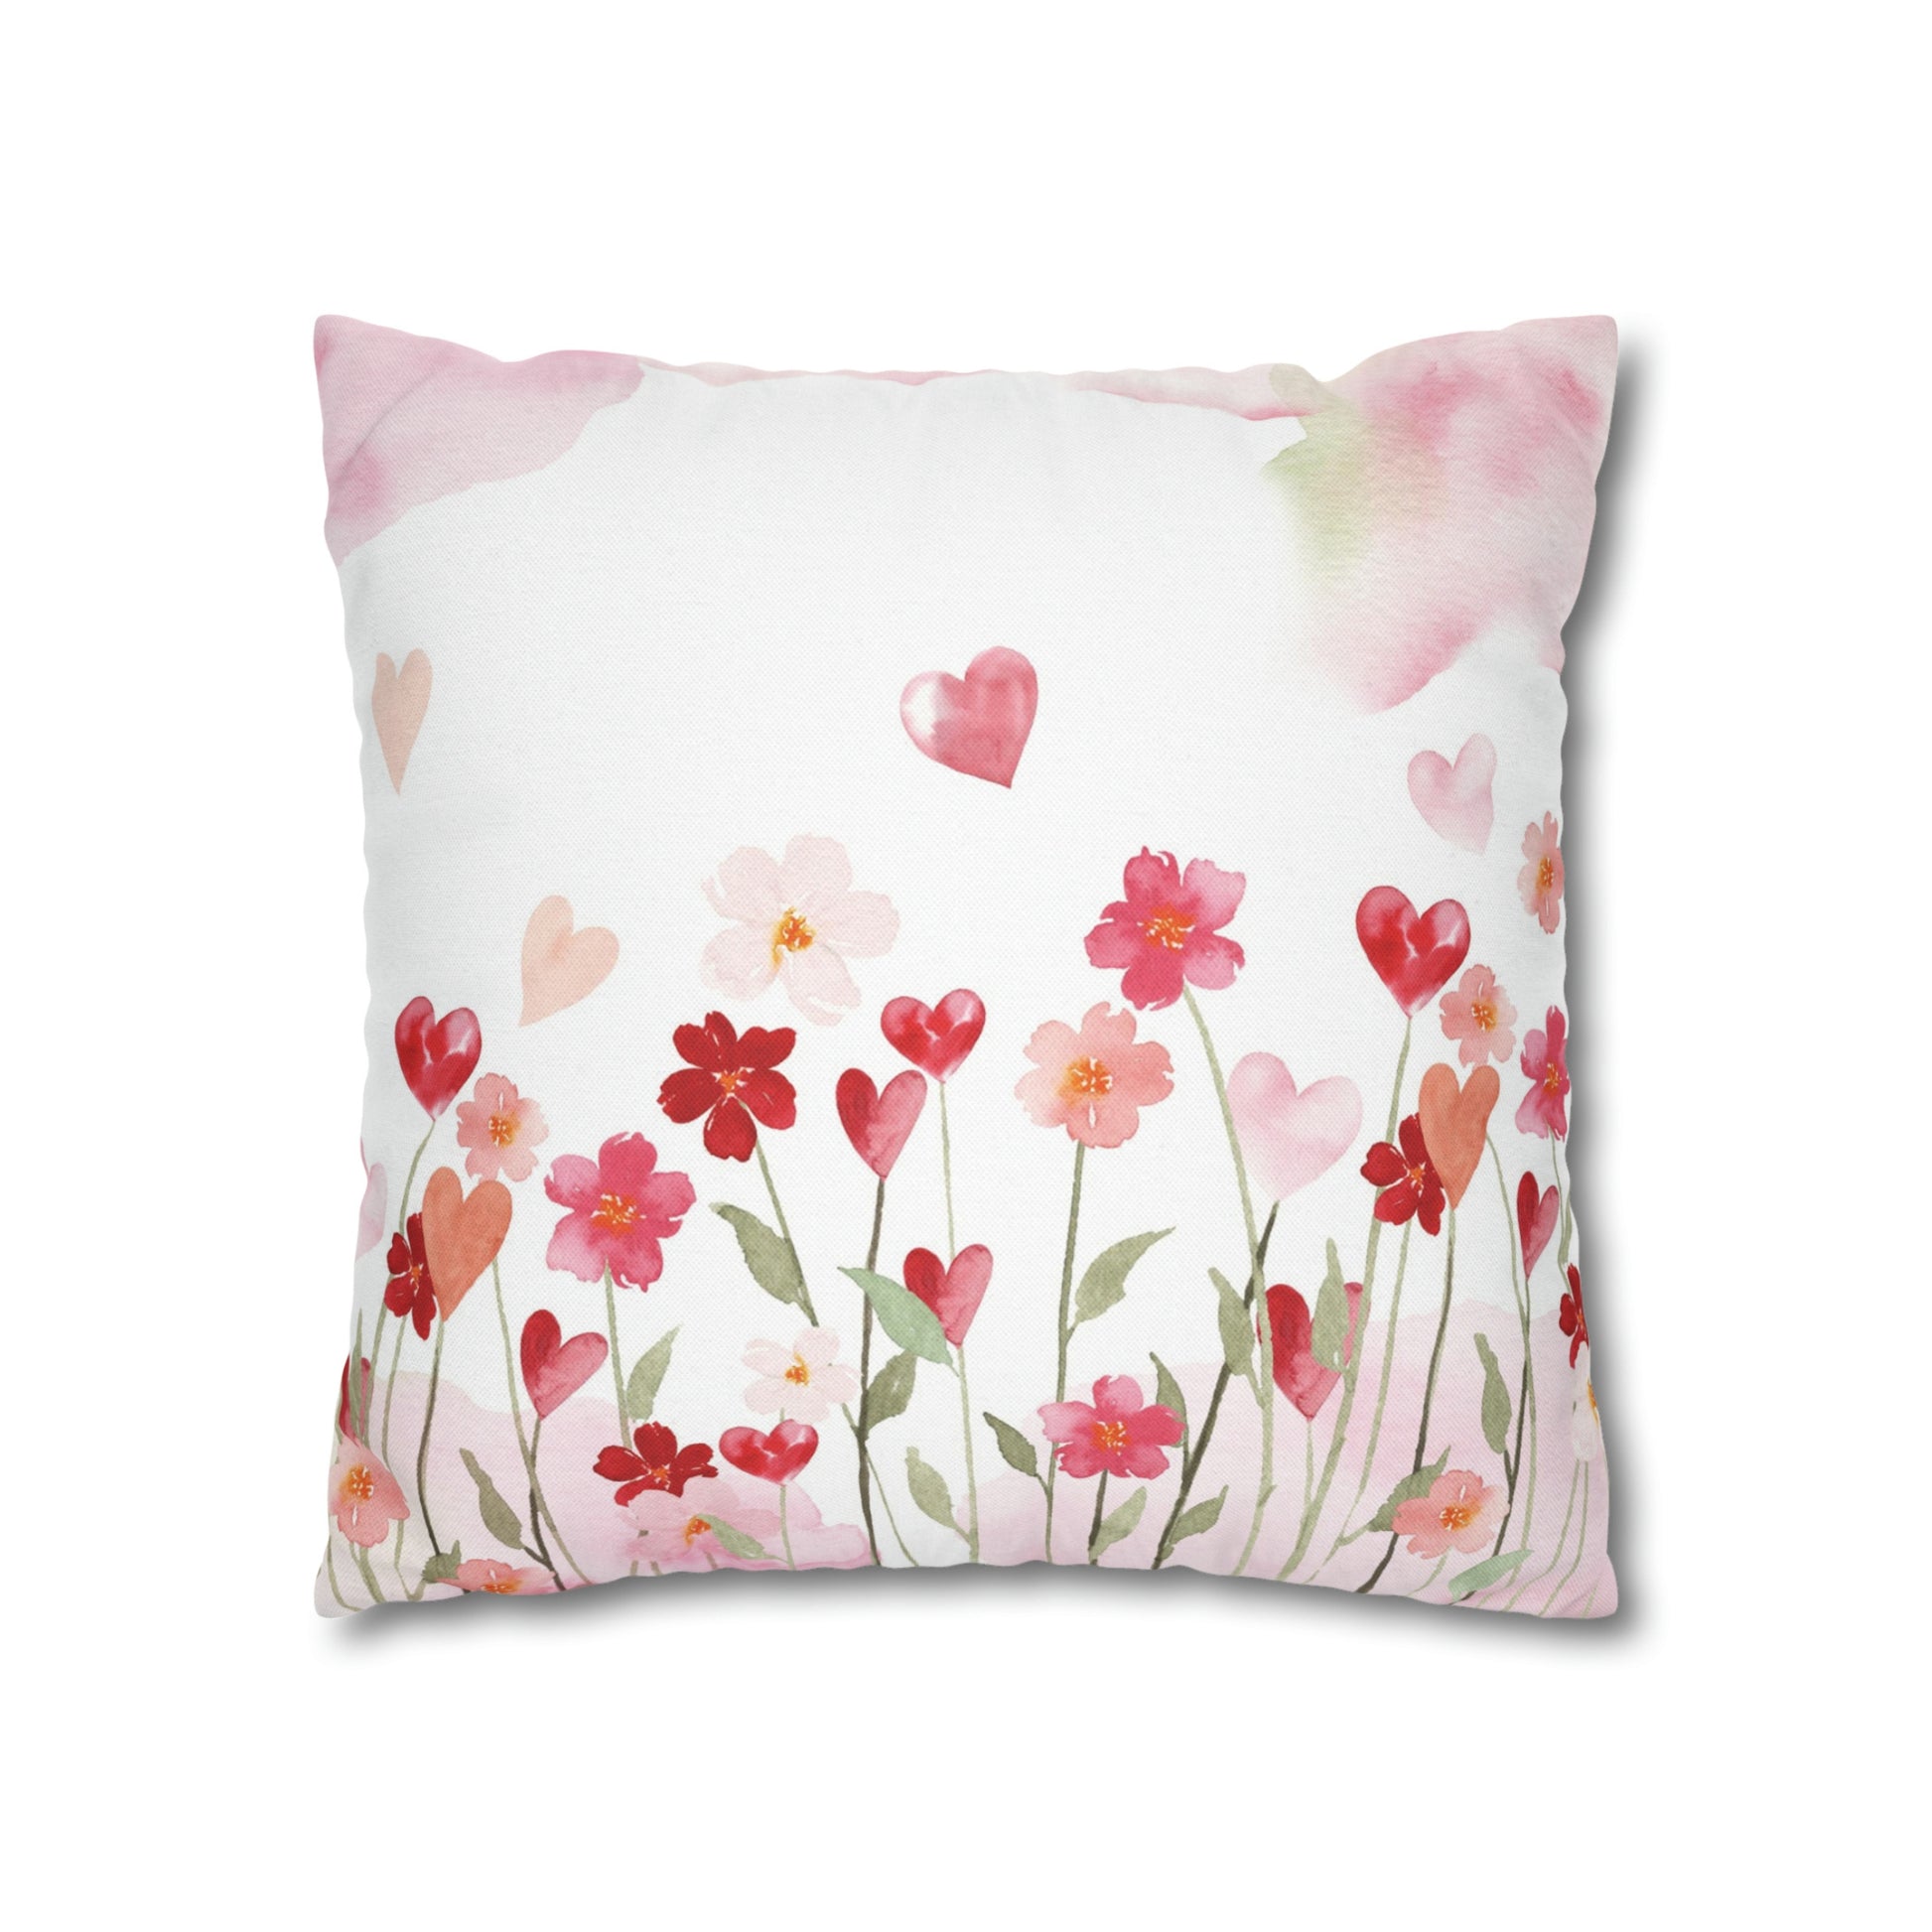 a white pillow with pink and red flowers on it